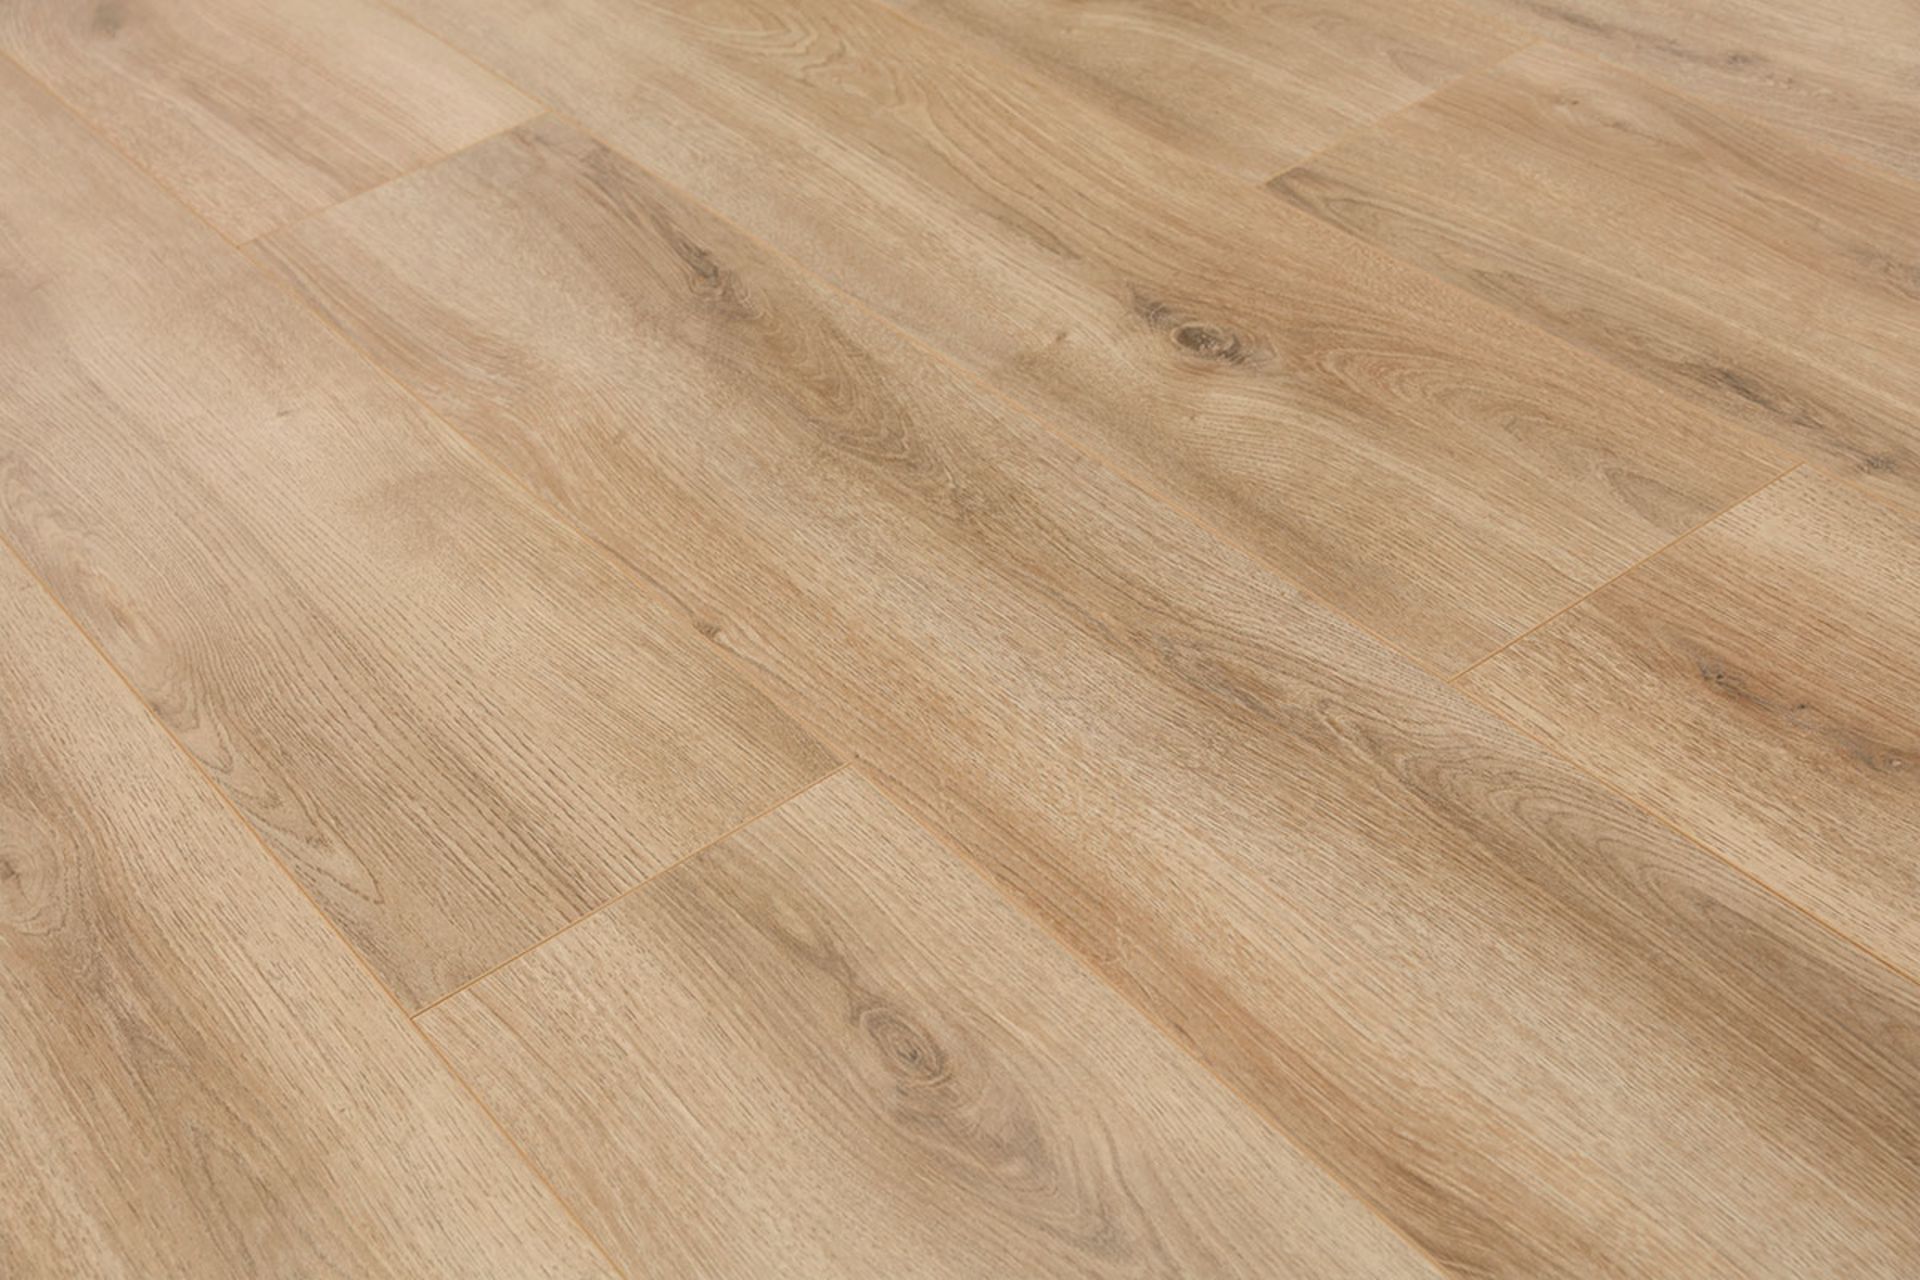 NEW 7.17 Square Meters of LAMINATE FLOORING SUMMER NATURAL OAK. With a warming natural oak tone... - Image 2 of 2